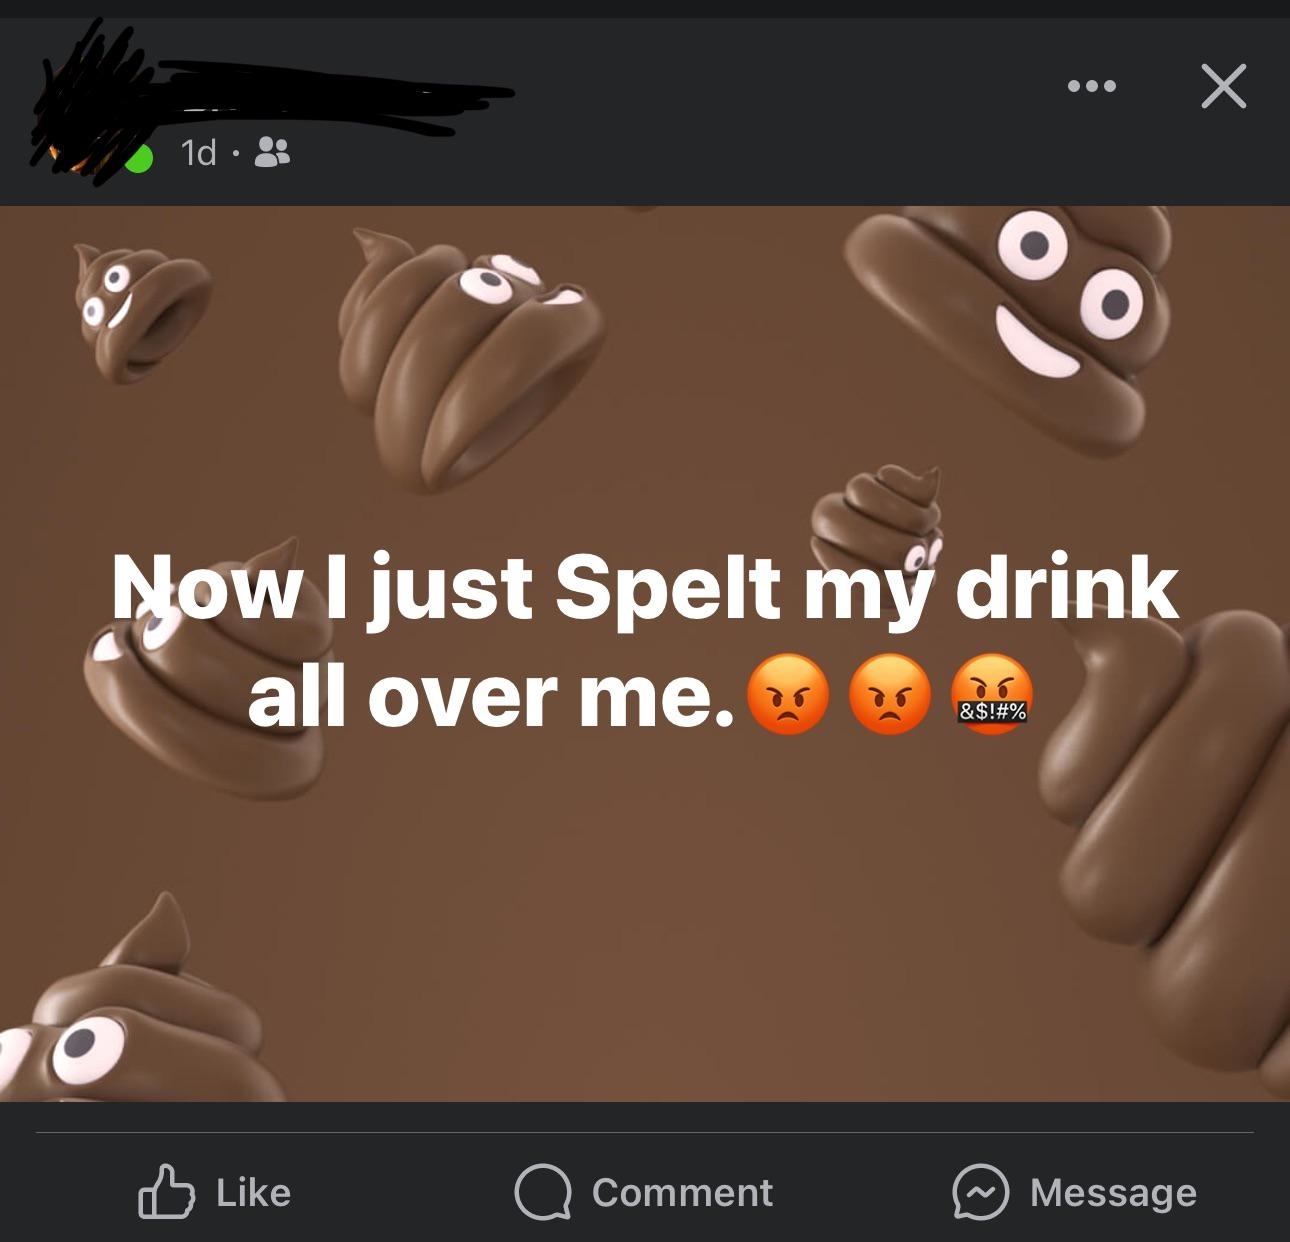 &quot;I just spelt my drink all over me&quot;